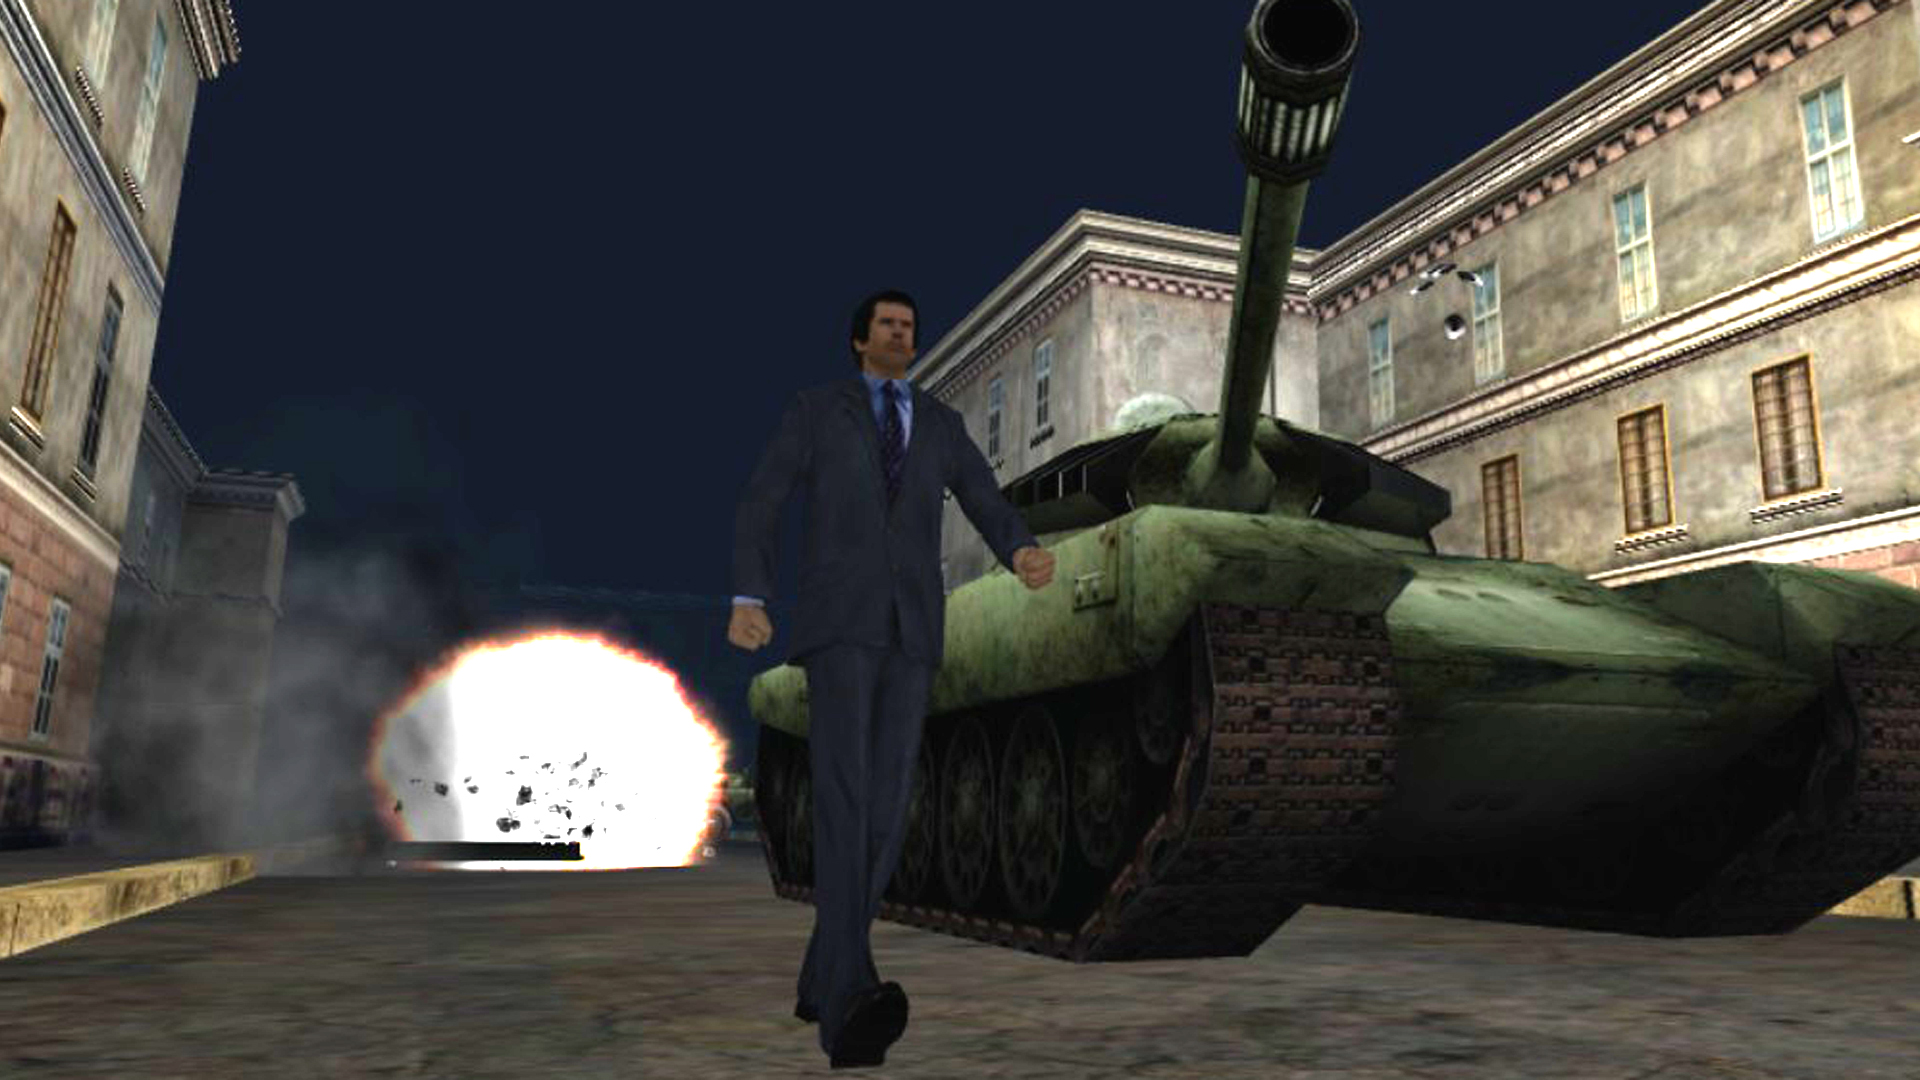 Here's The Complete List Of Xbox Achievements In GoldenEye 007